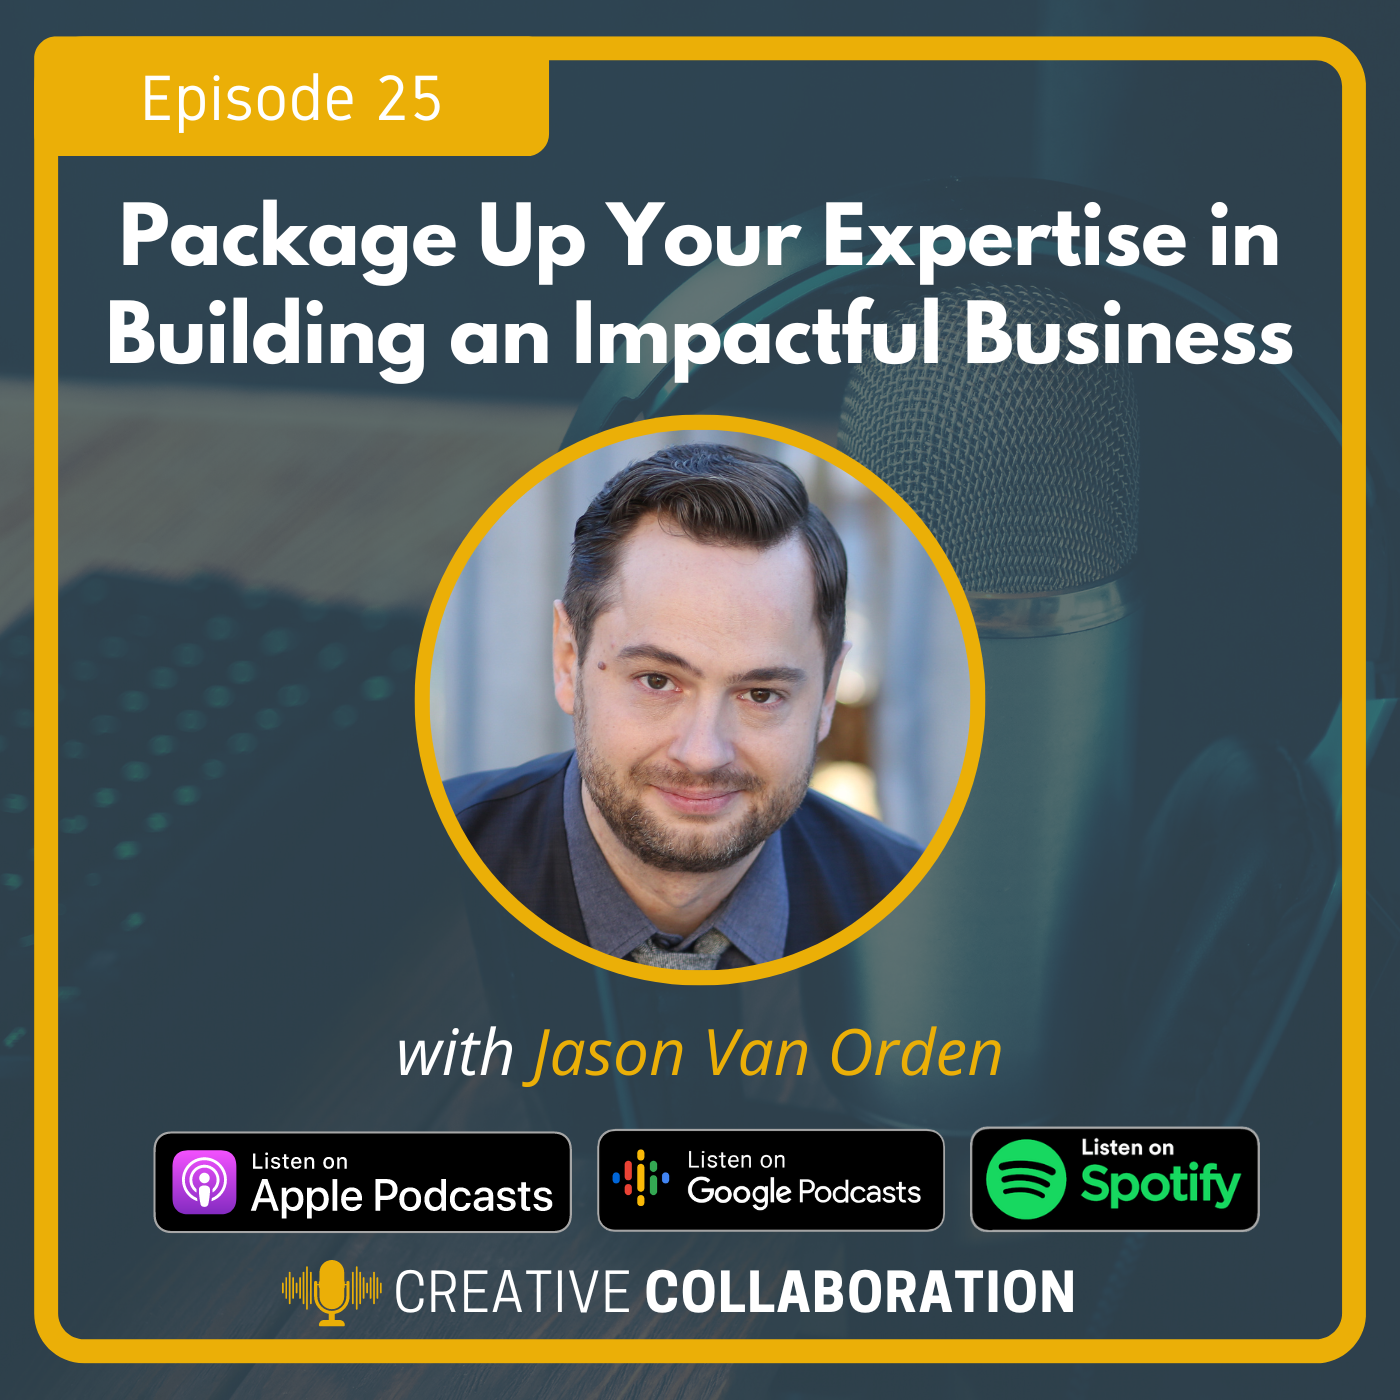 Package Up Your Expertise in Building an Impactful Business with Jason Van Orden Image